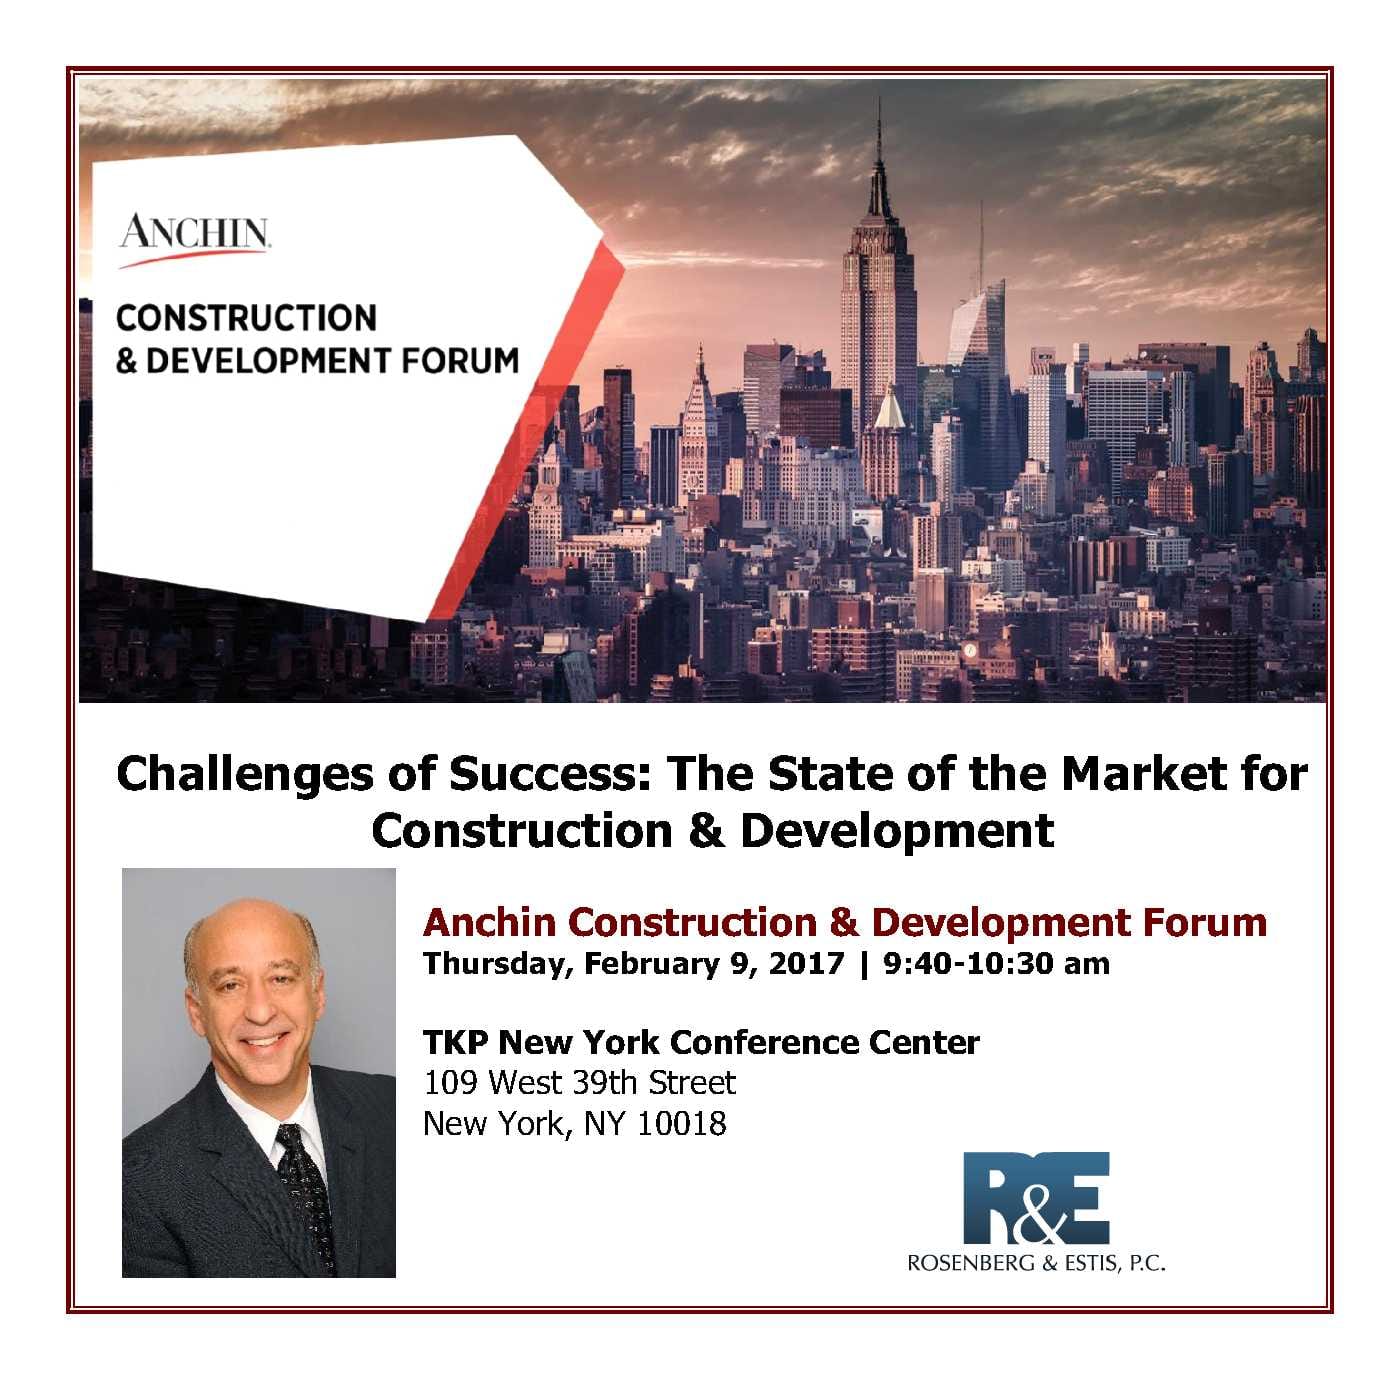 Flyer of Anchin Construction & Development Forum on Thursday, Feb 9, 2017, 9:40-10:30 am at TKP New York Conference Center